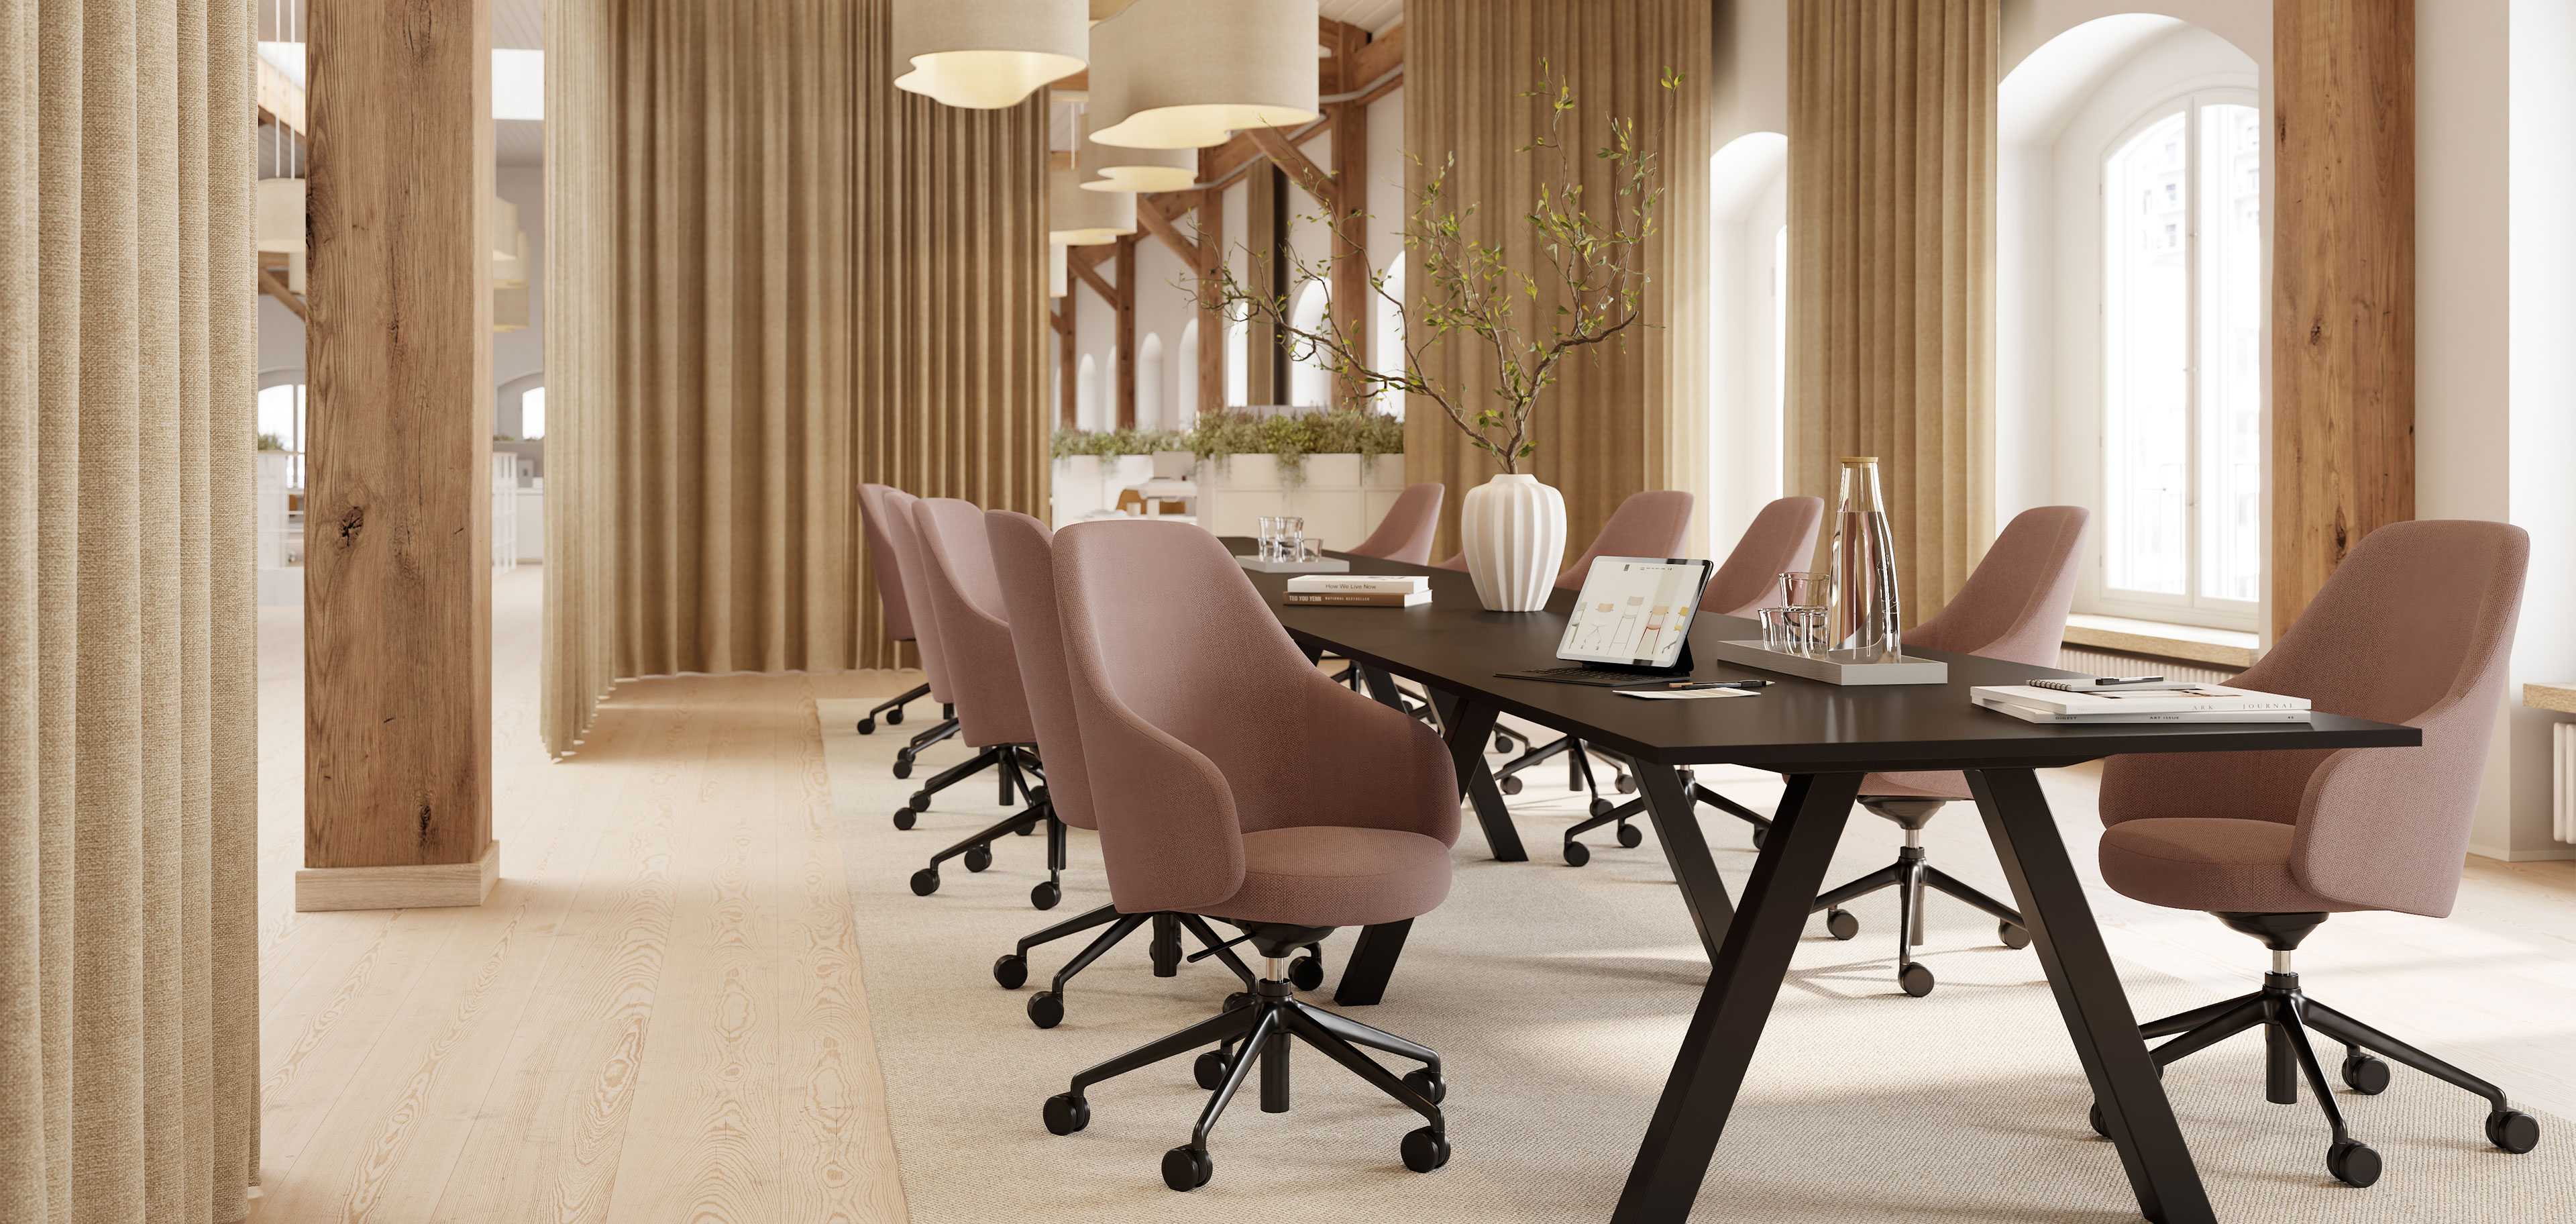 Sola Meet & Work chairs by the table